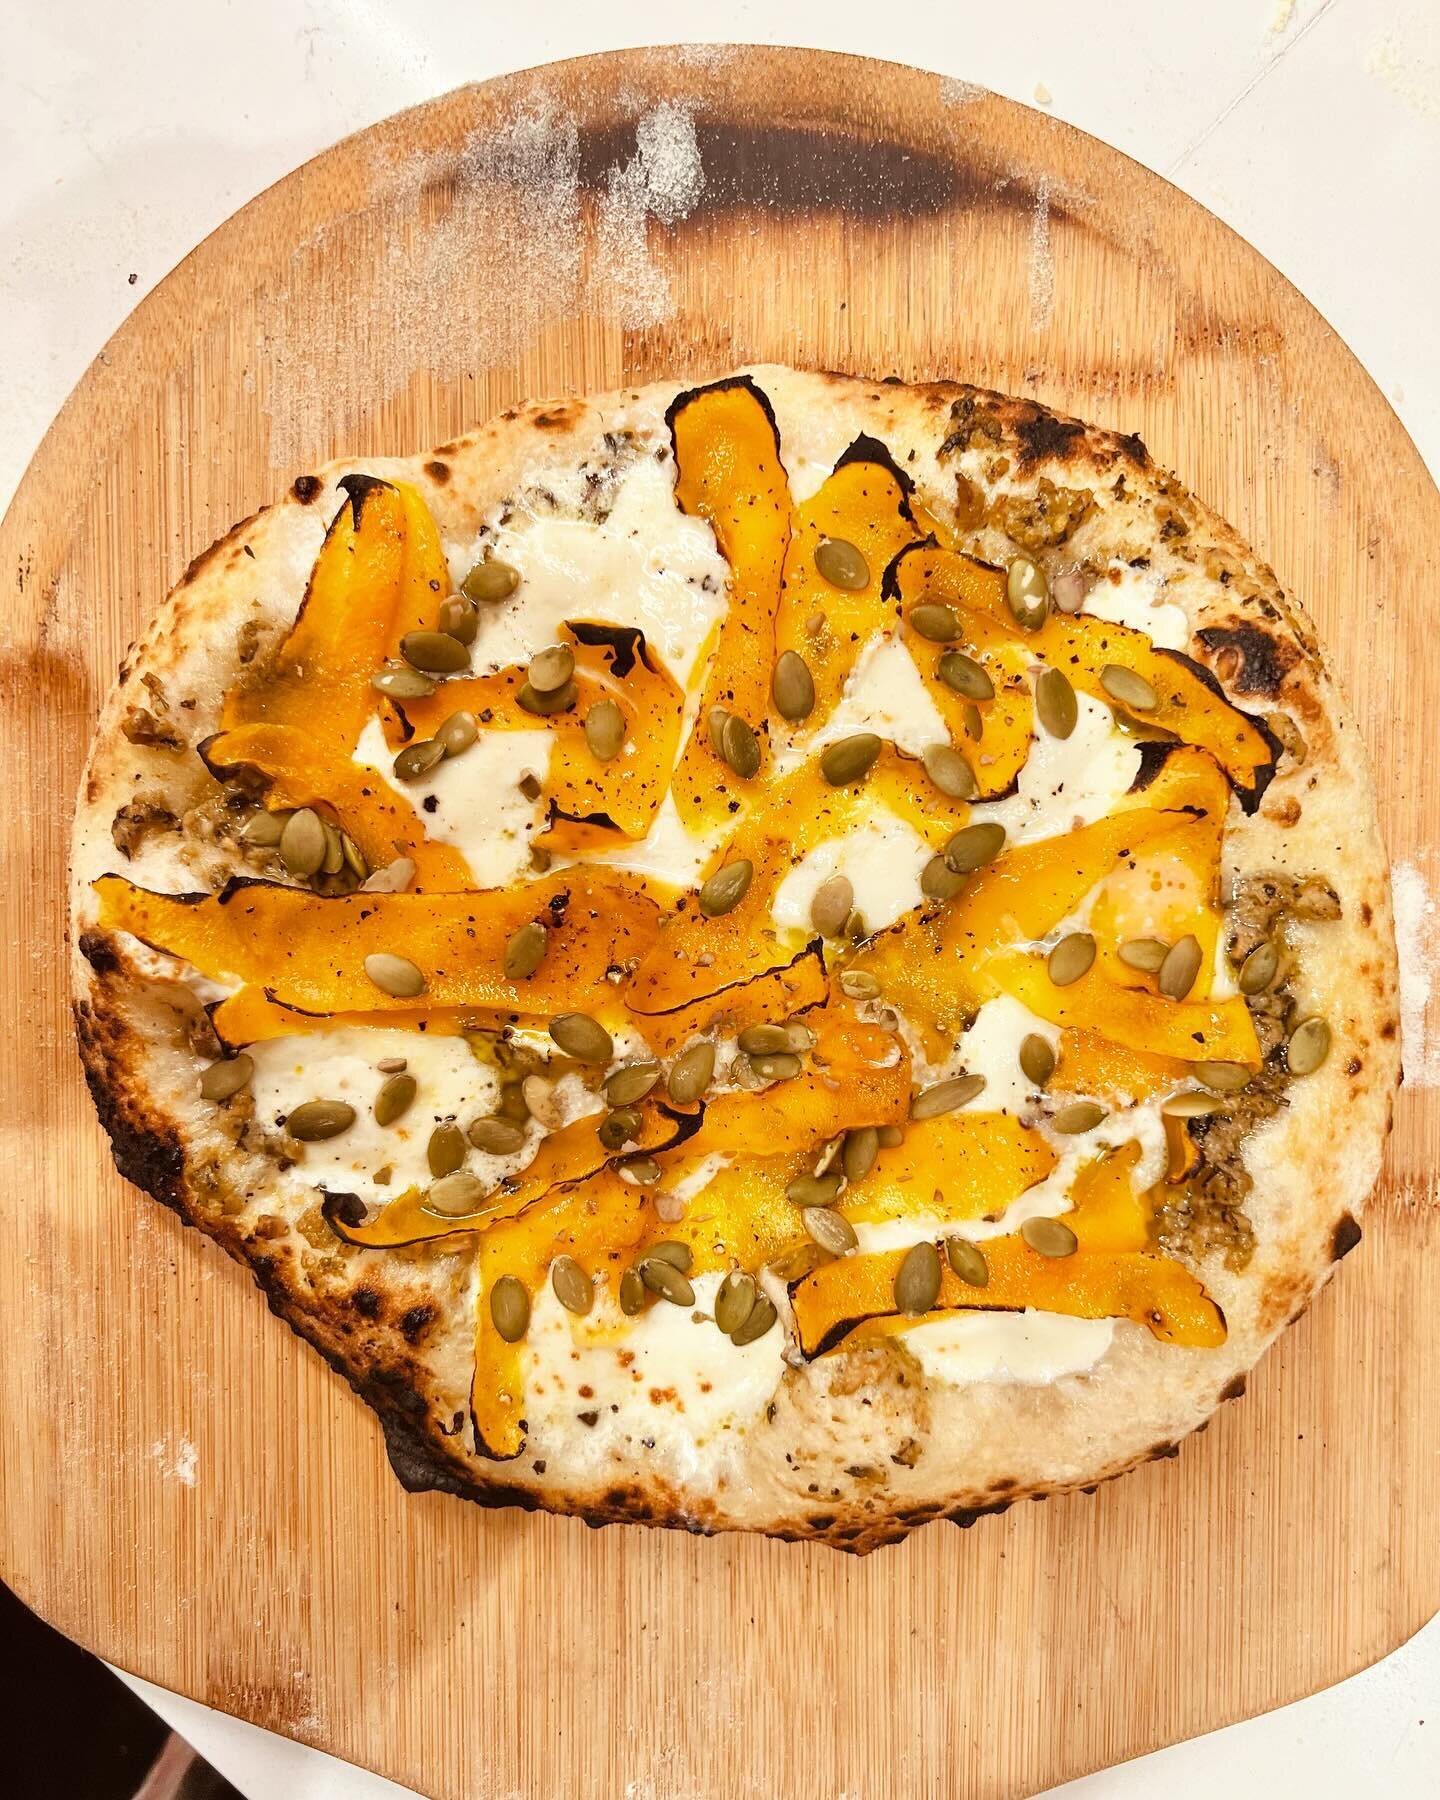 I&rsquo;m practicing to be ready for National Pizza Day Friday. This is a combination of pesto, tapenade,burrata and butternut squash shavings marinated in olive oil, with a few pepitas thrown in for crunch and contrast. Hit the spot with a zippy whi